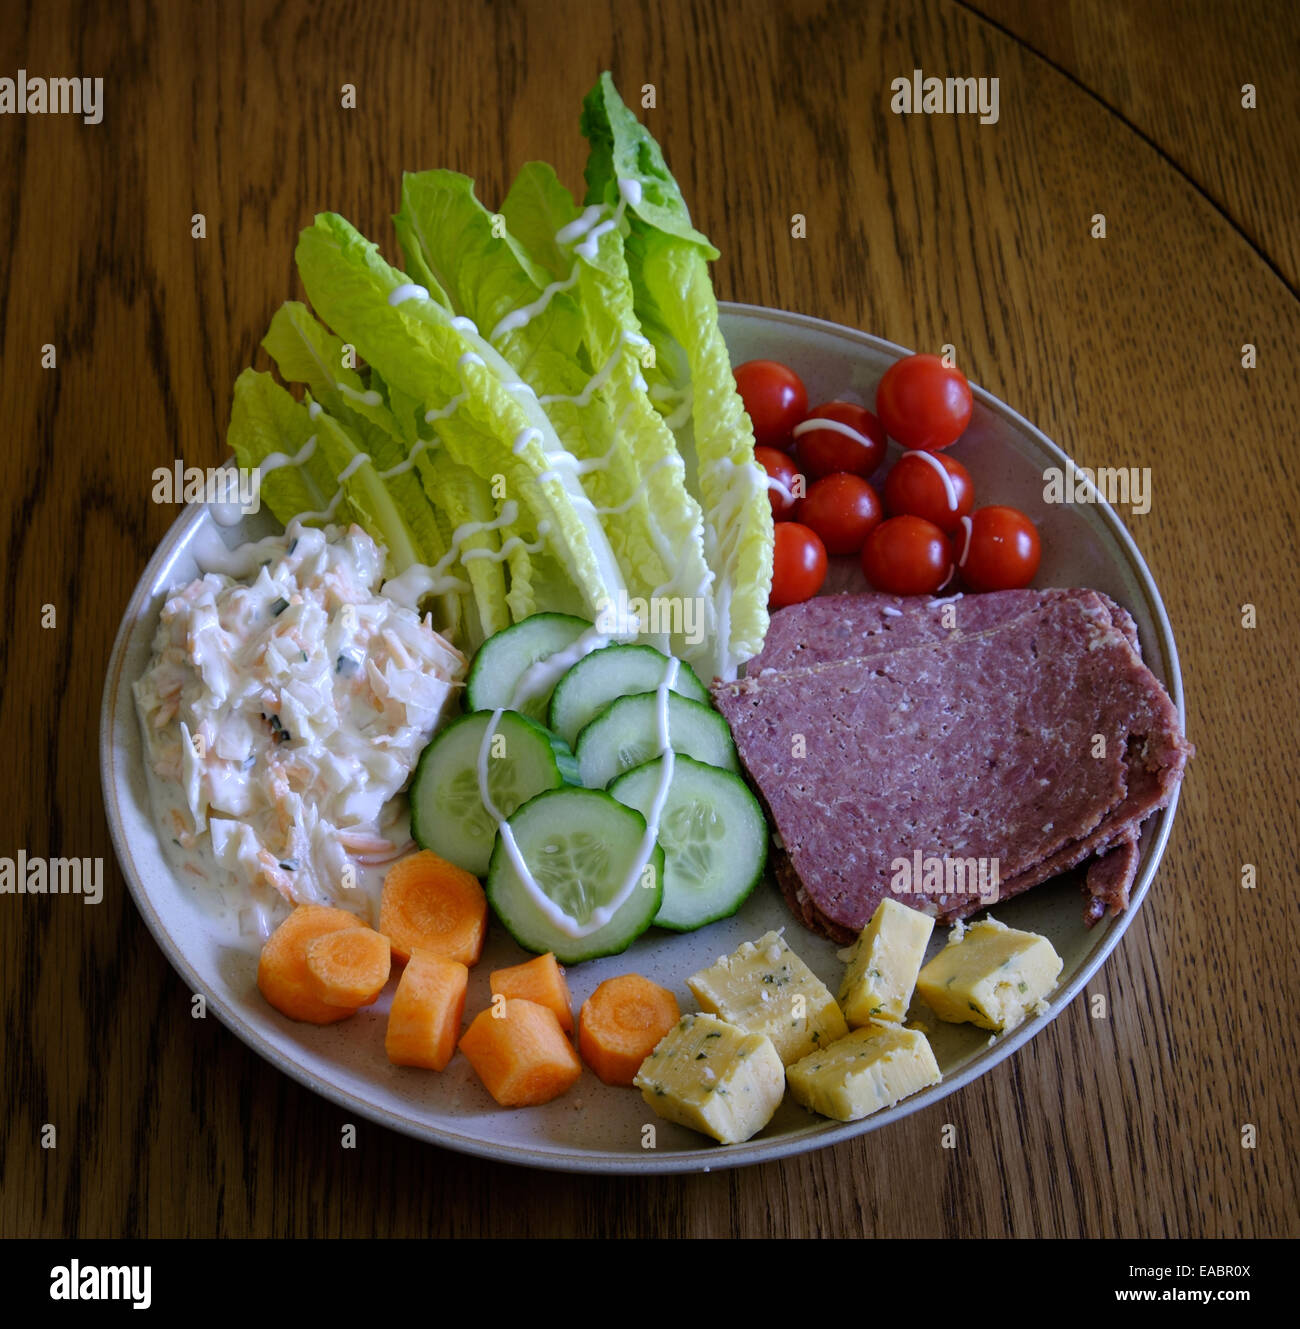 Healthy nutritious Salad for lunch Stock Photo